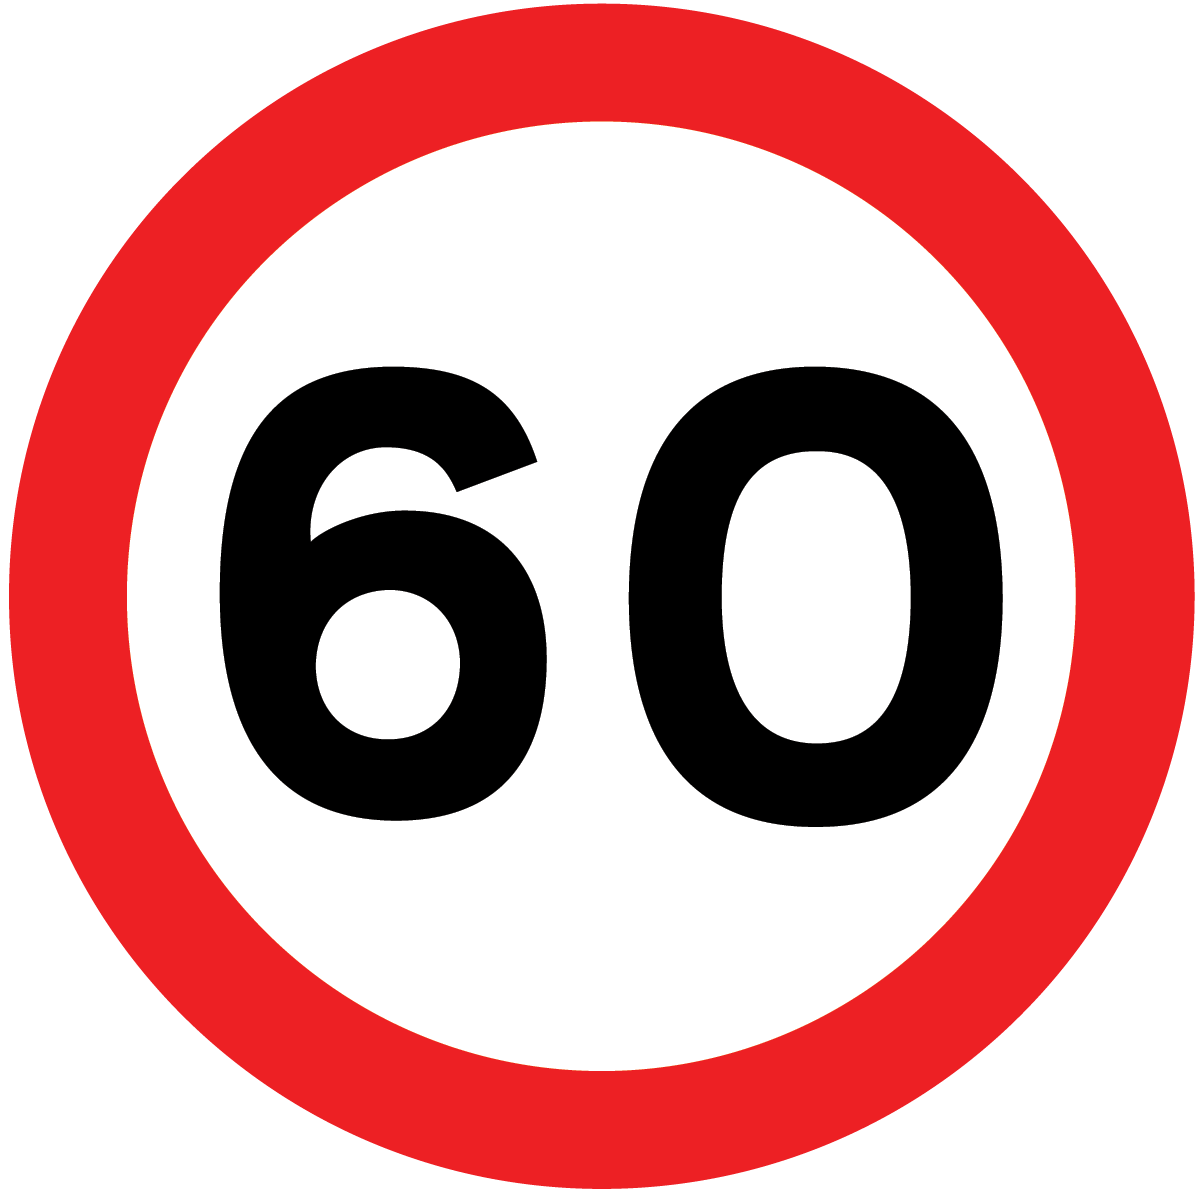 Maximum speed limit sign (60 mph) - Theory Test